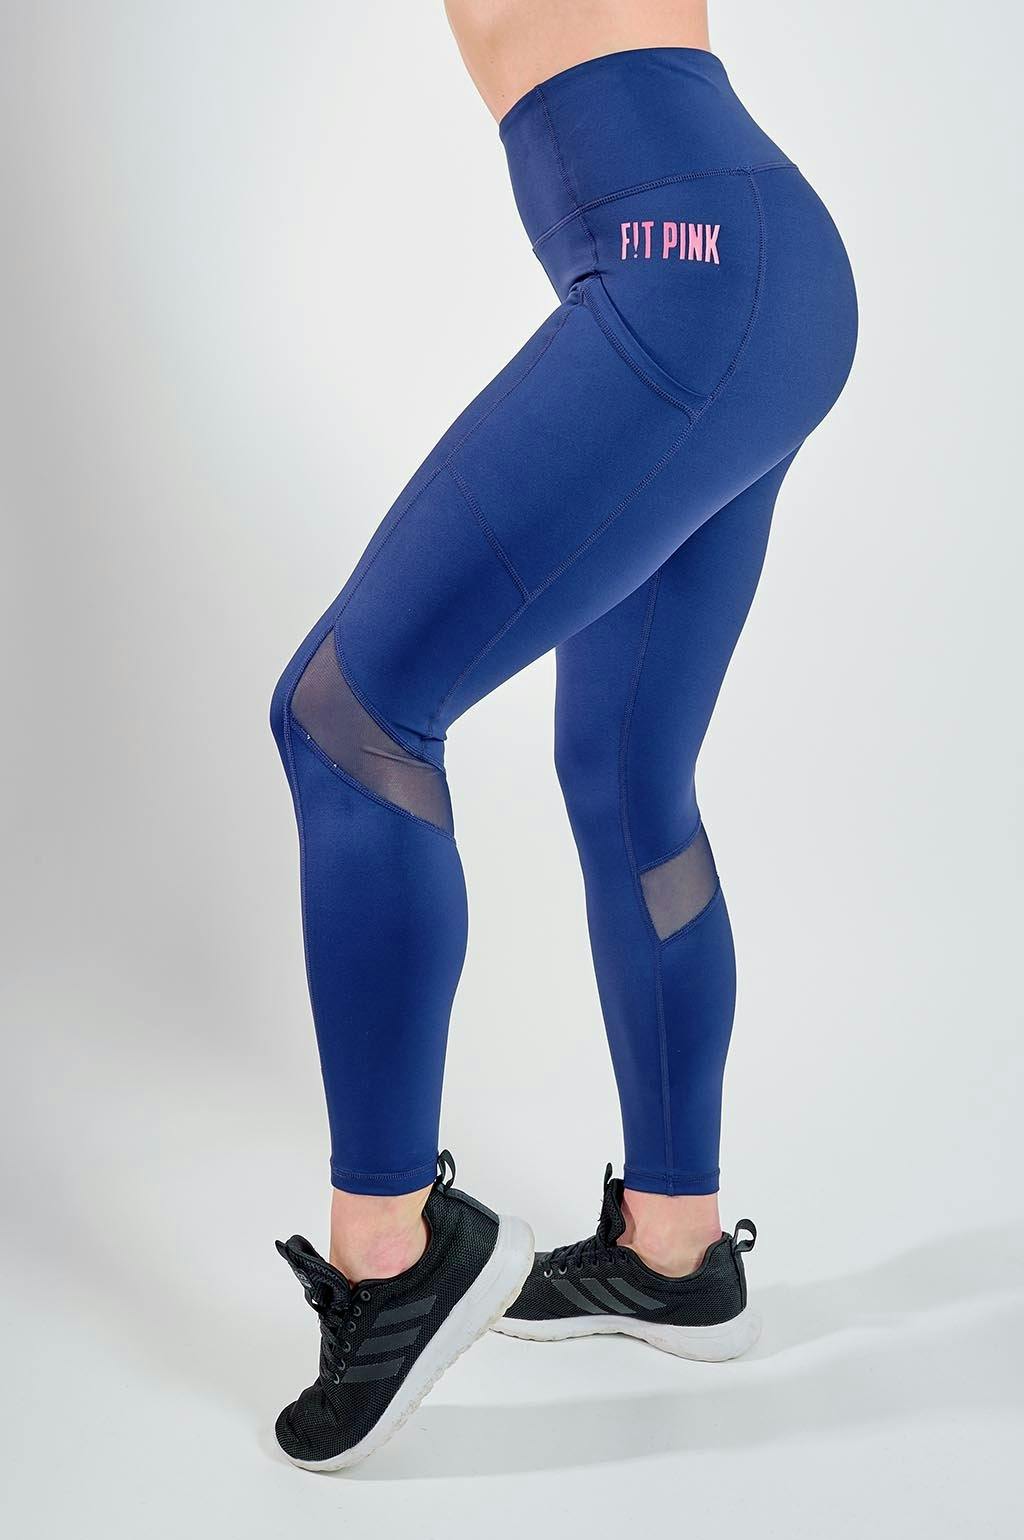 Sports Leggings With Deep Side Pockets in Black